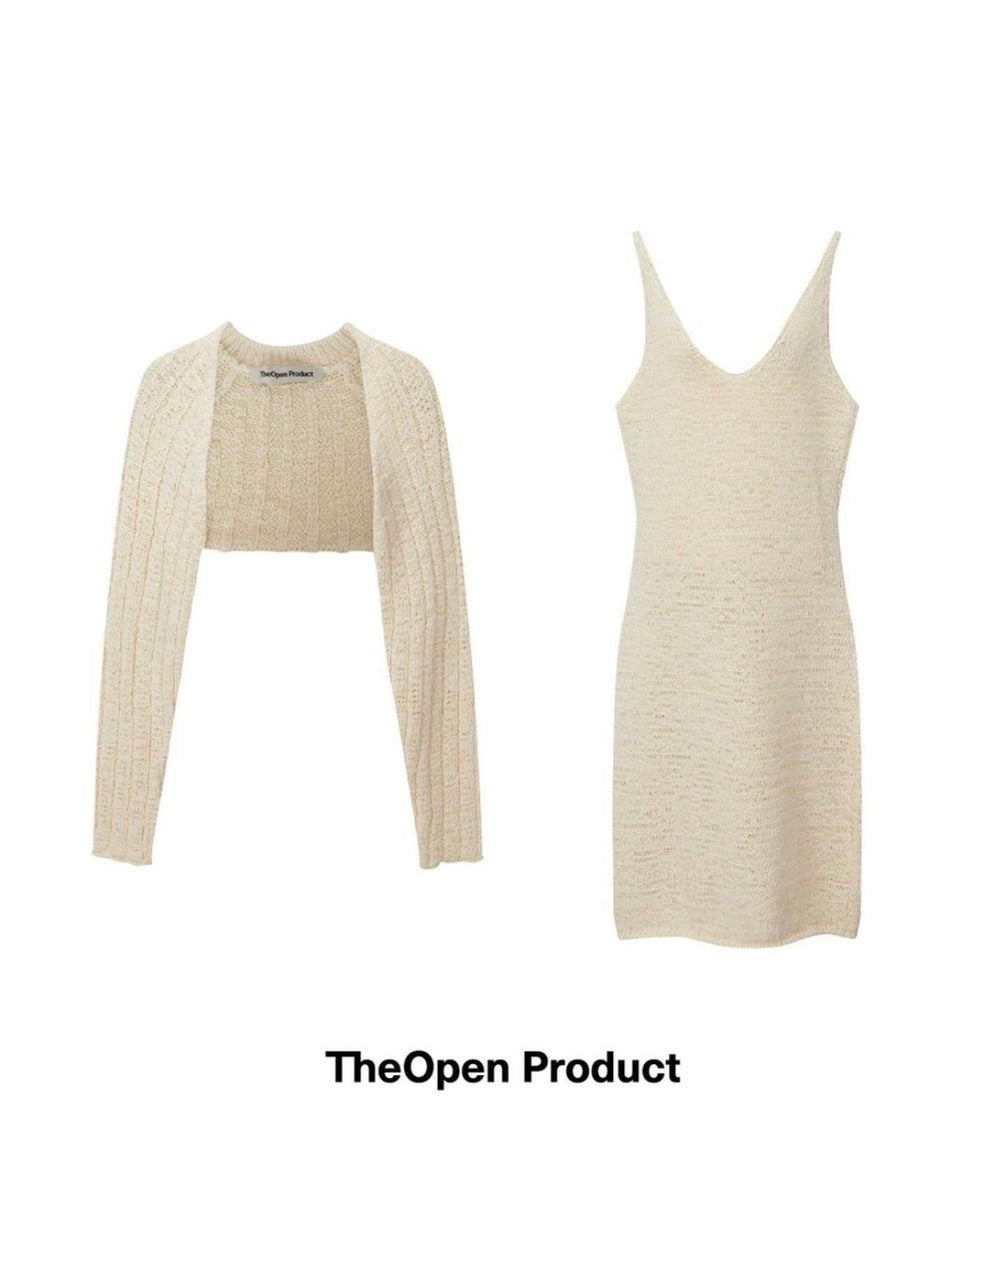 COTTON KNIT SLEEVELESS DRESS BY THEOPEN PRODUCT IN CREAM